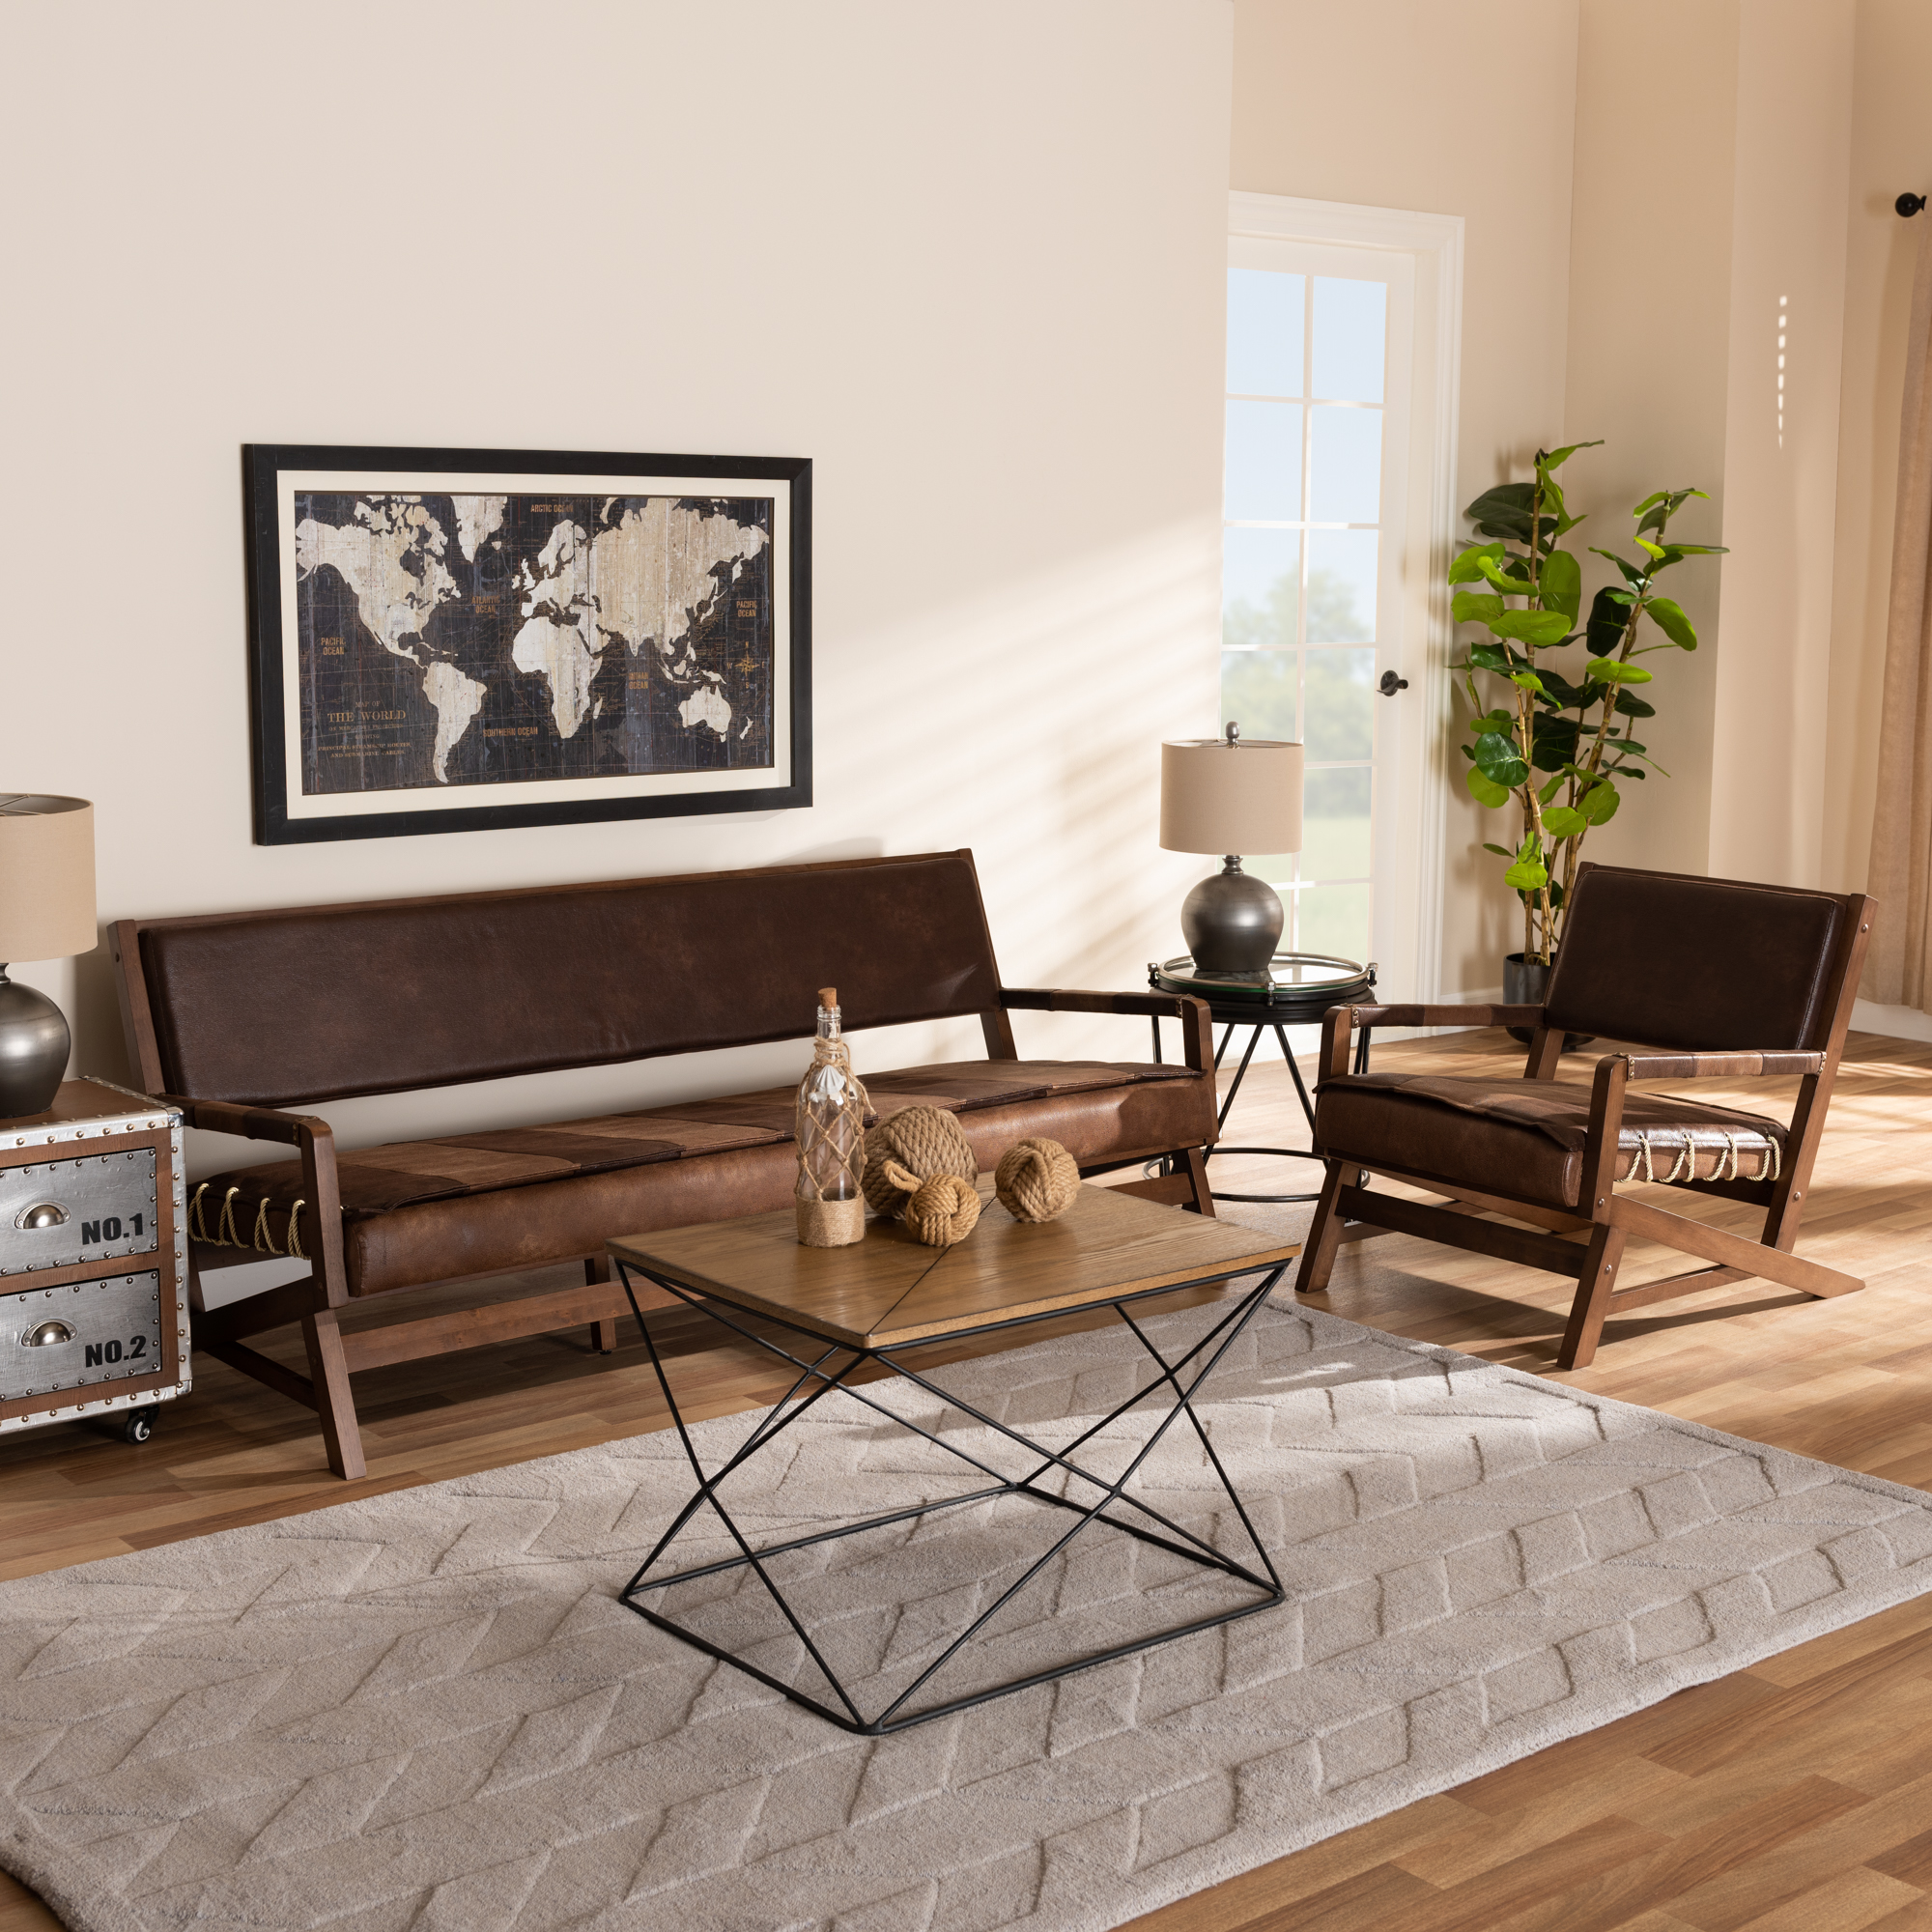 Featured image of post 5 Piece Living Room Furniture Sets Leather - From the contemporary and modern to the casual avalon 5 piece leather reclining living room.